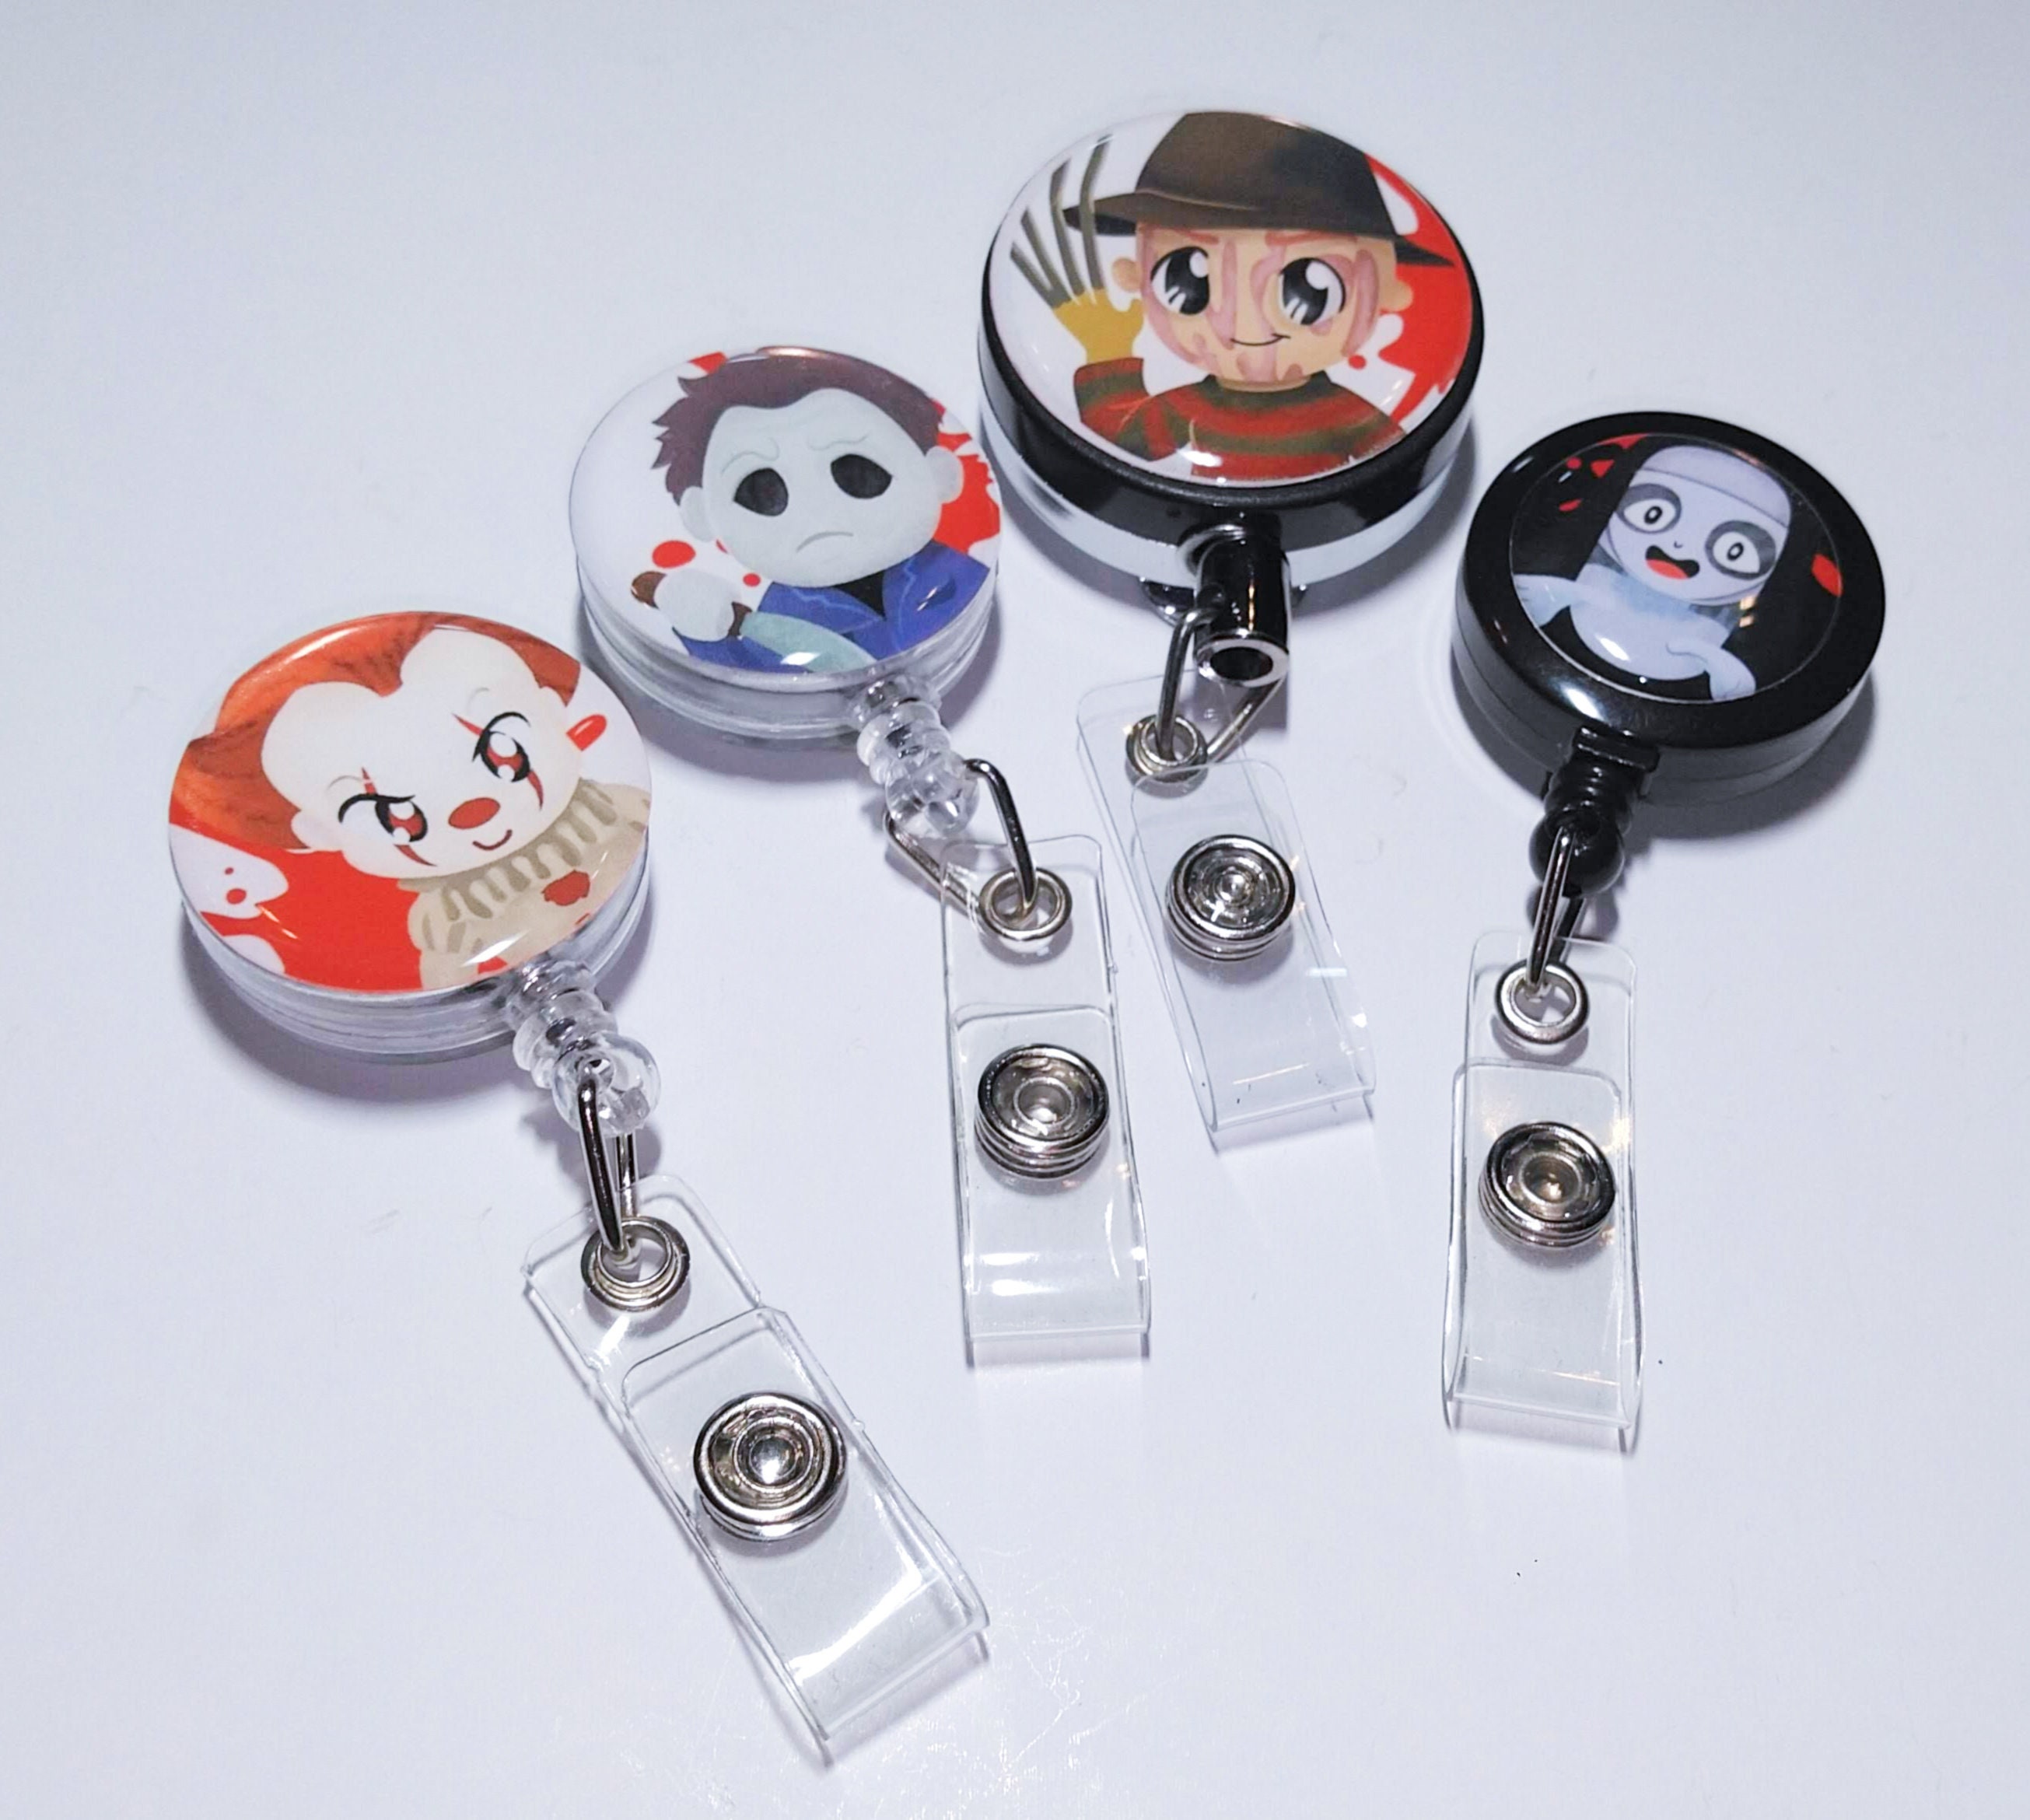 Classic Horror Movie Villains Badge Reels or Stethoscope ID Tags